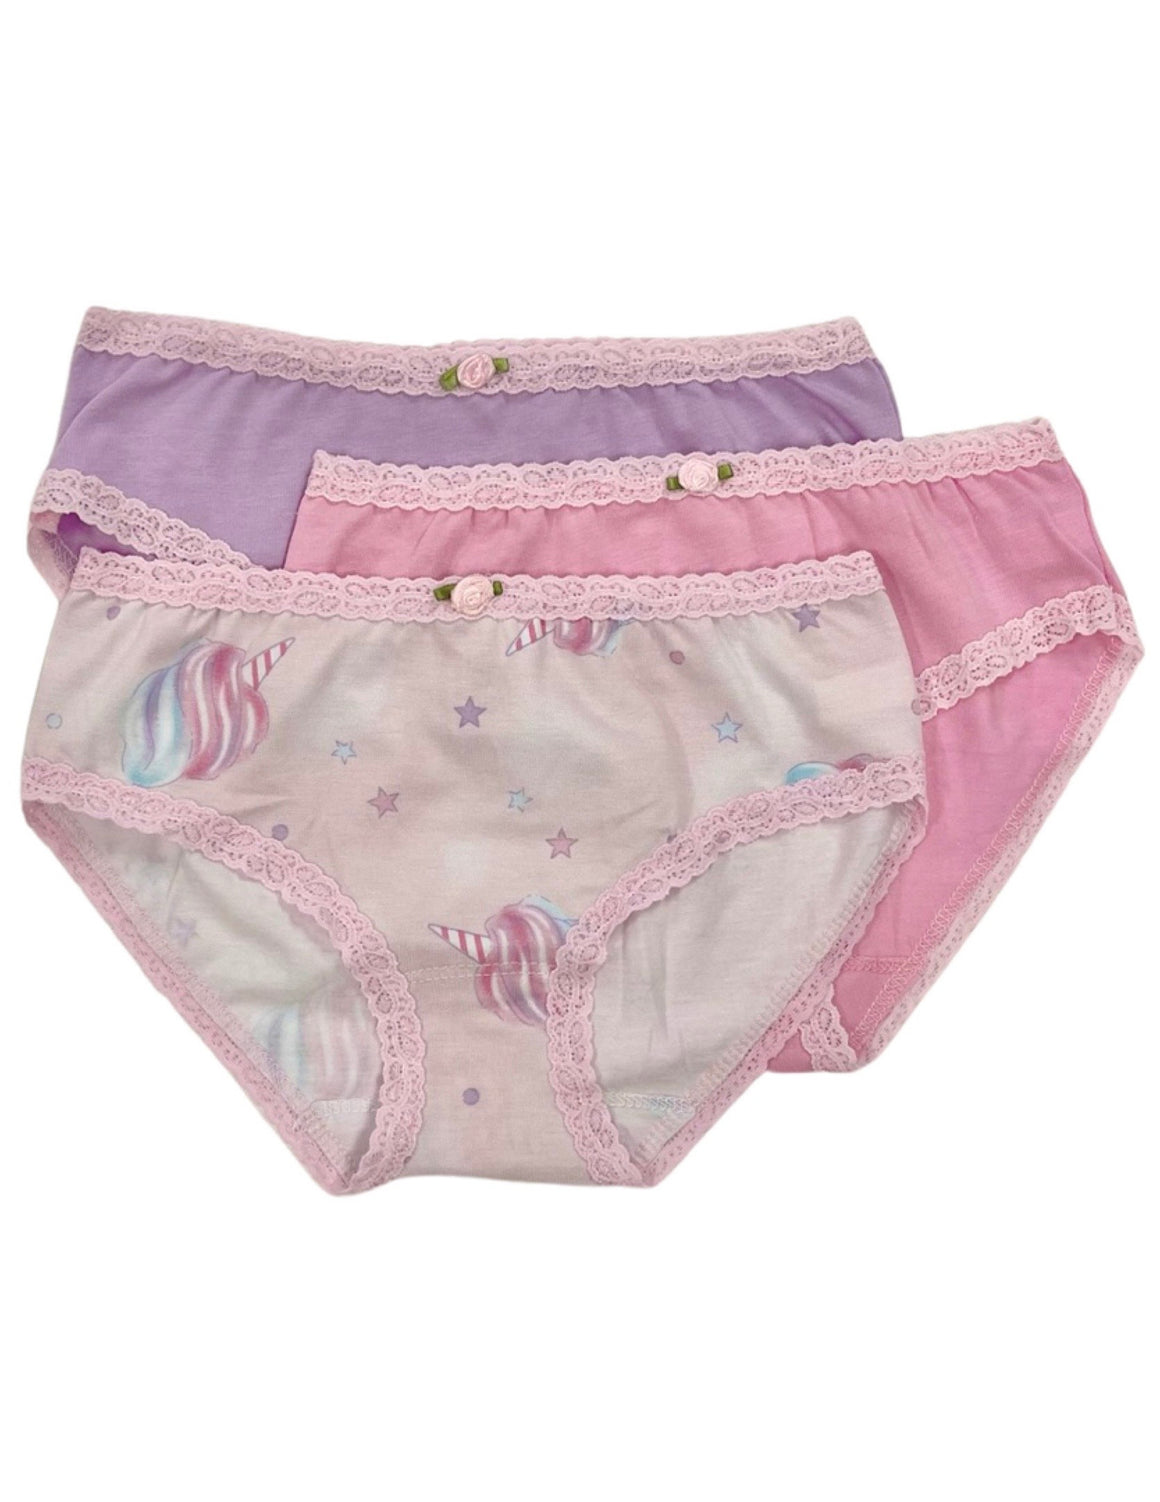 Cotton Candy 3-Pack Panty